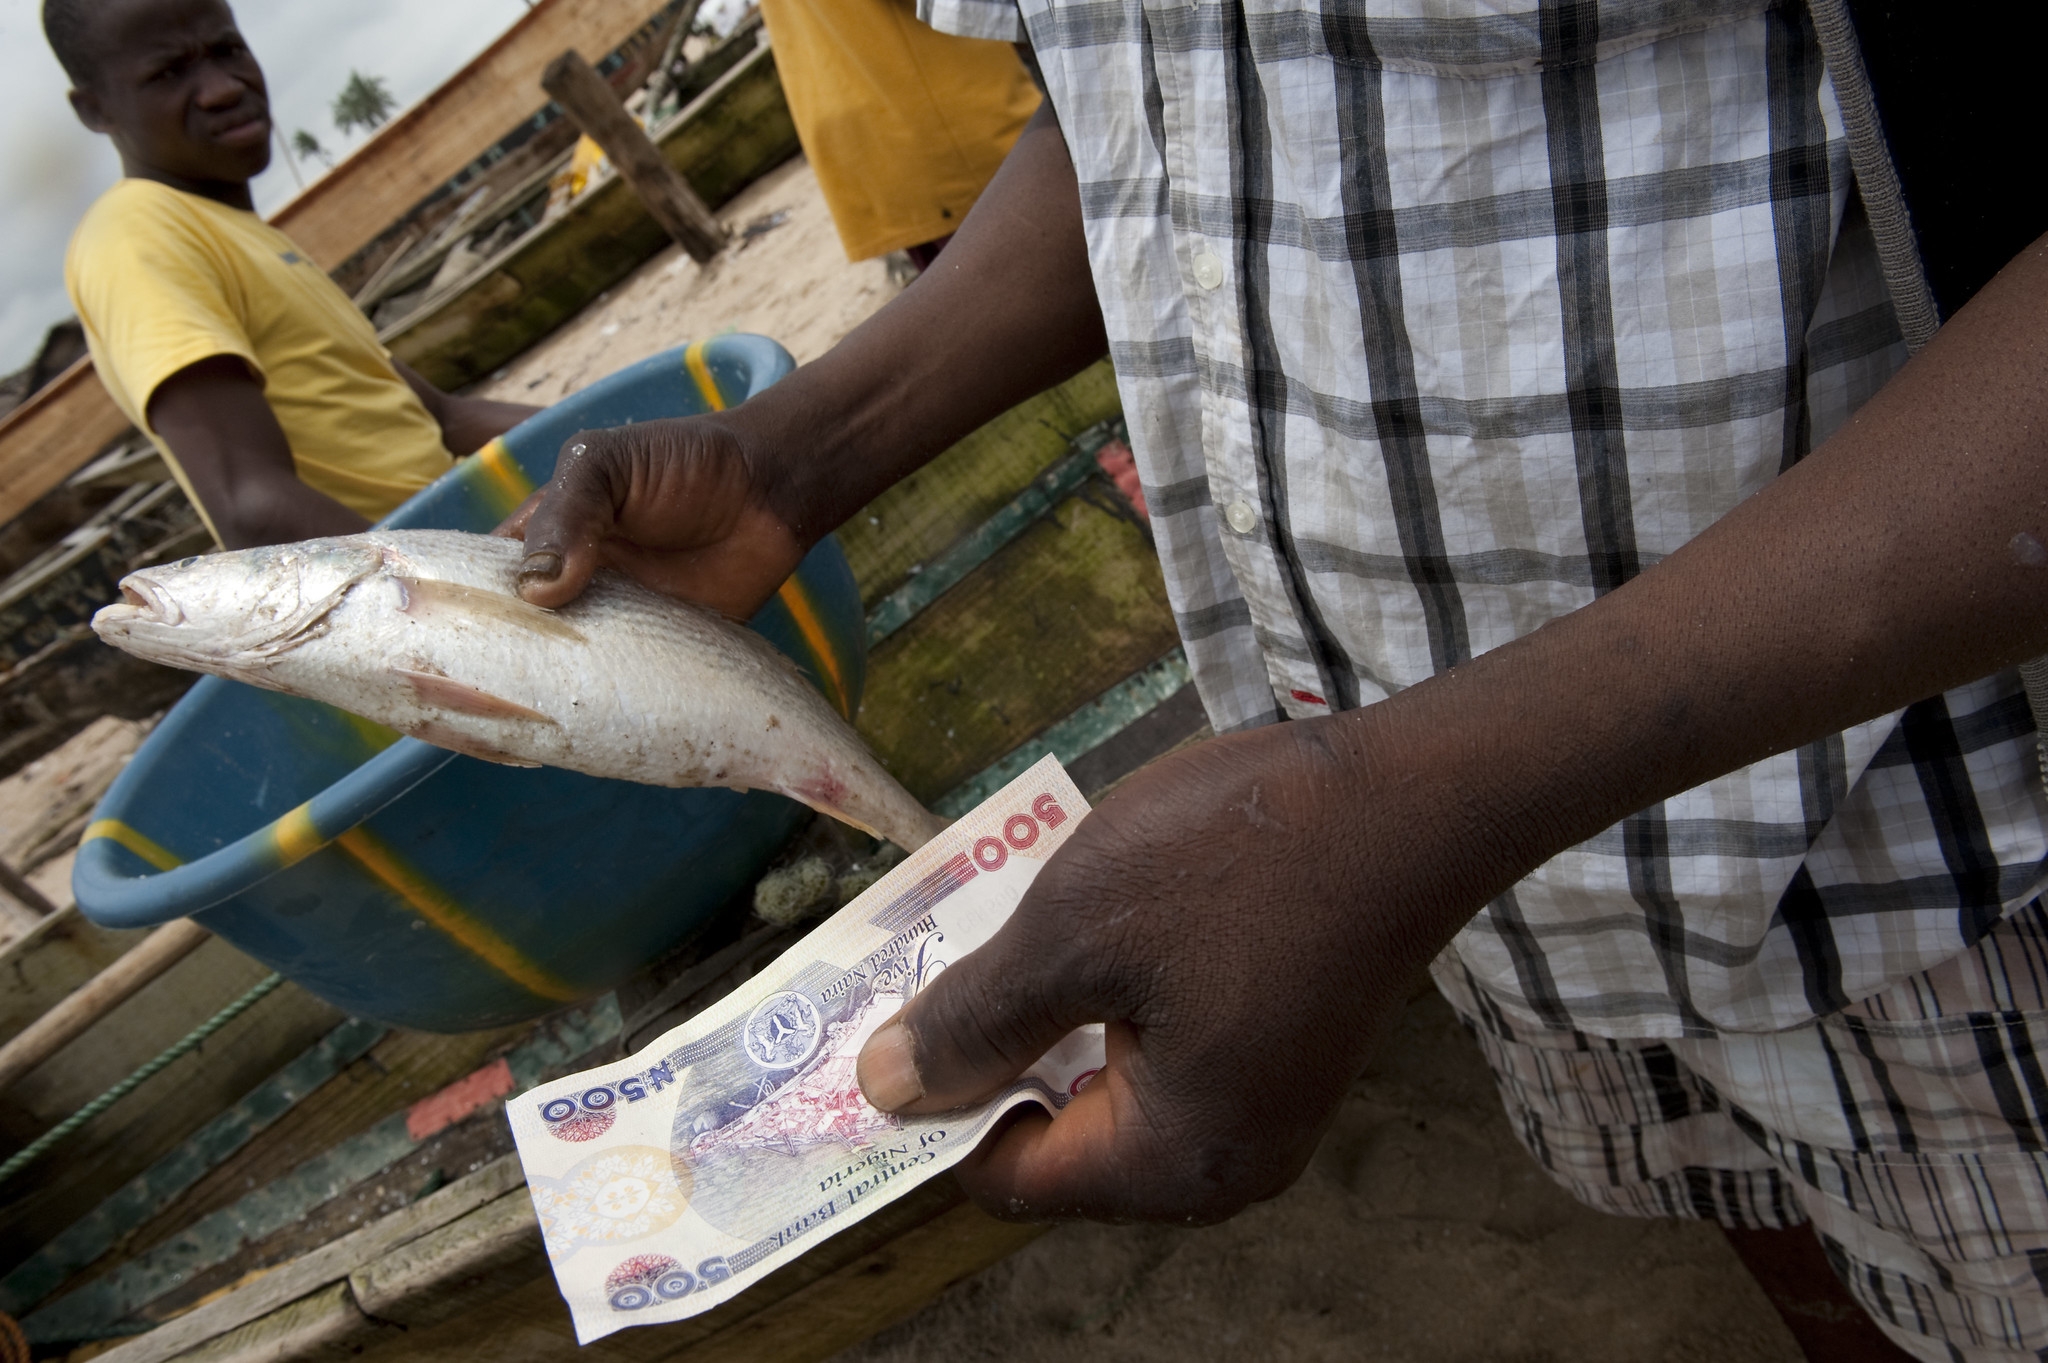 New funding from IDRC will help better inform policy options to address food price shocks in Africa’s fragile contexts